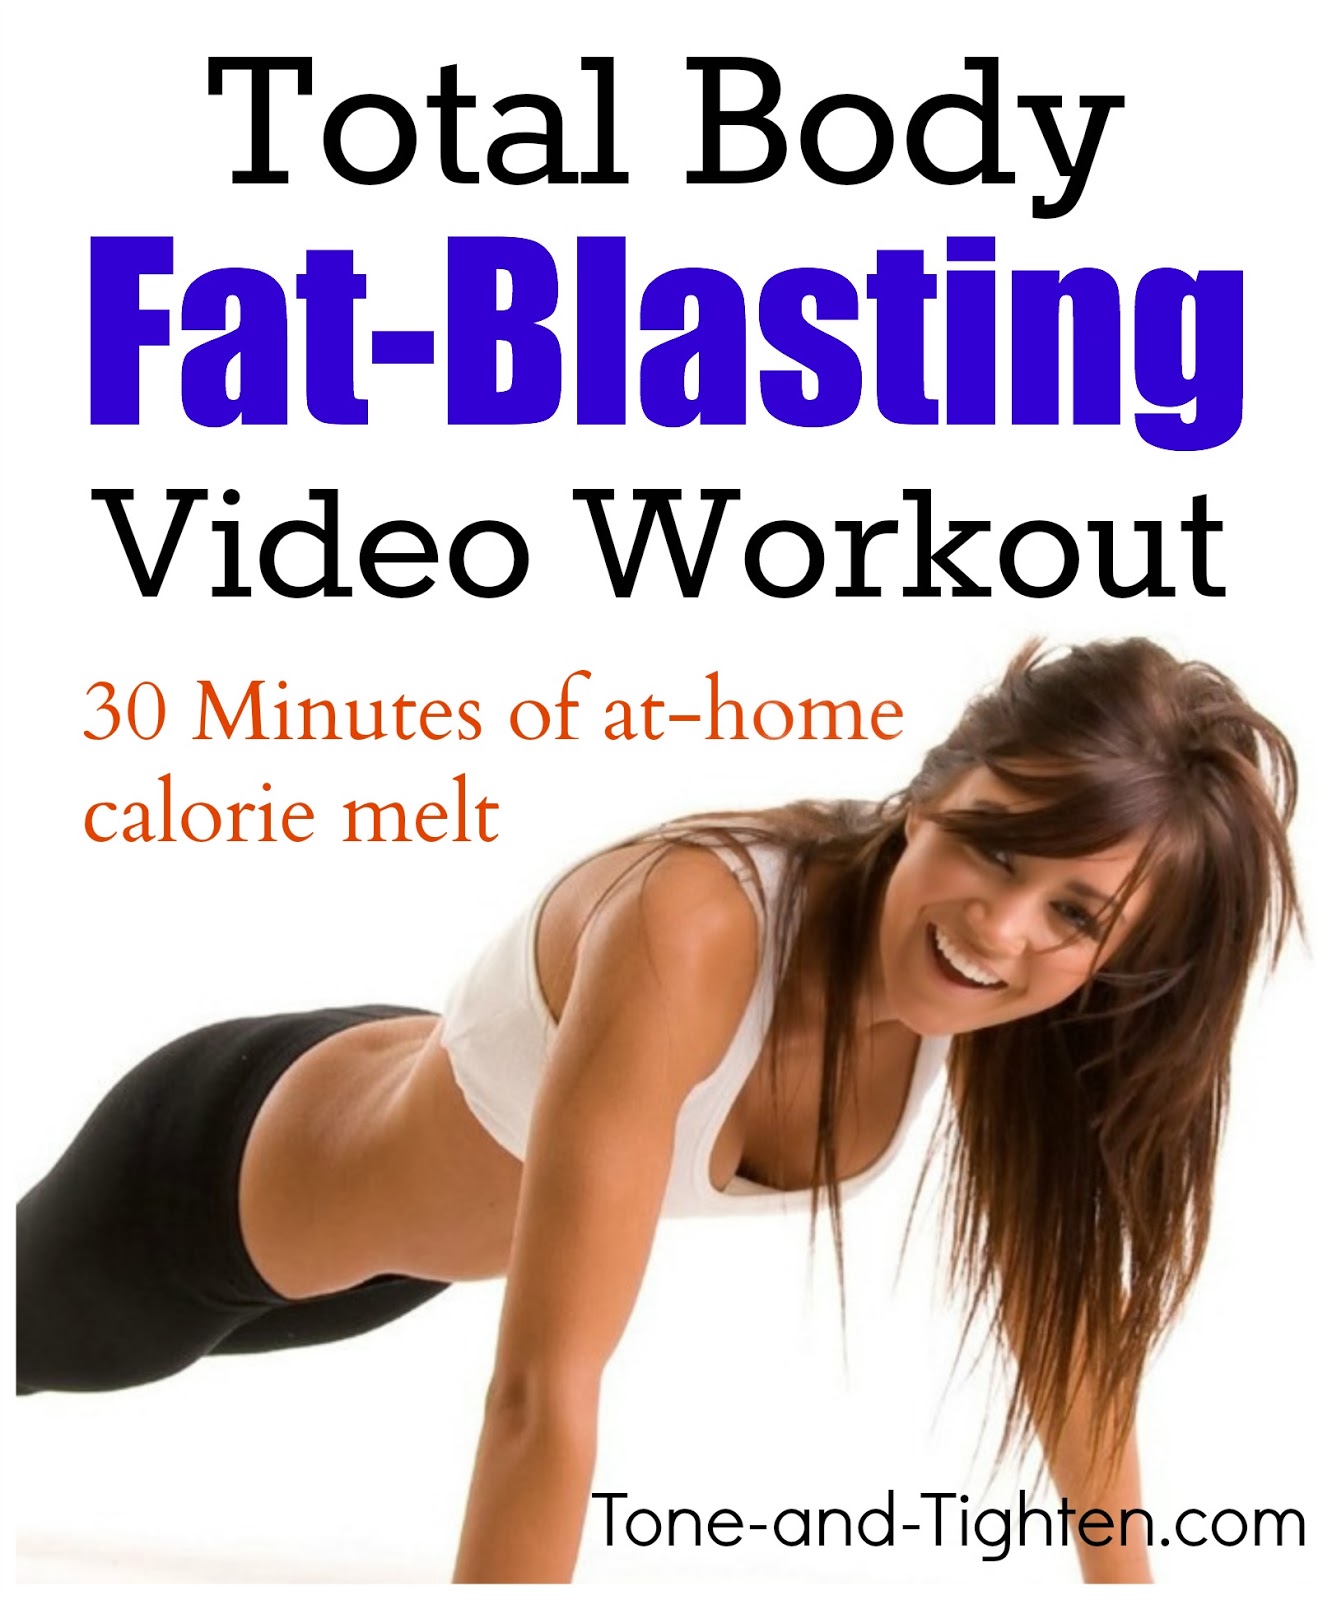 30 Minute Fat-Burning Cardio Video Workout